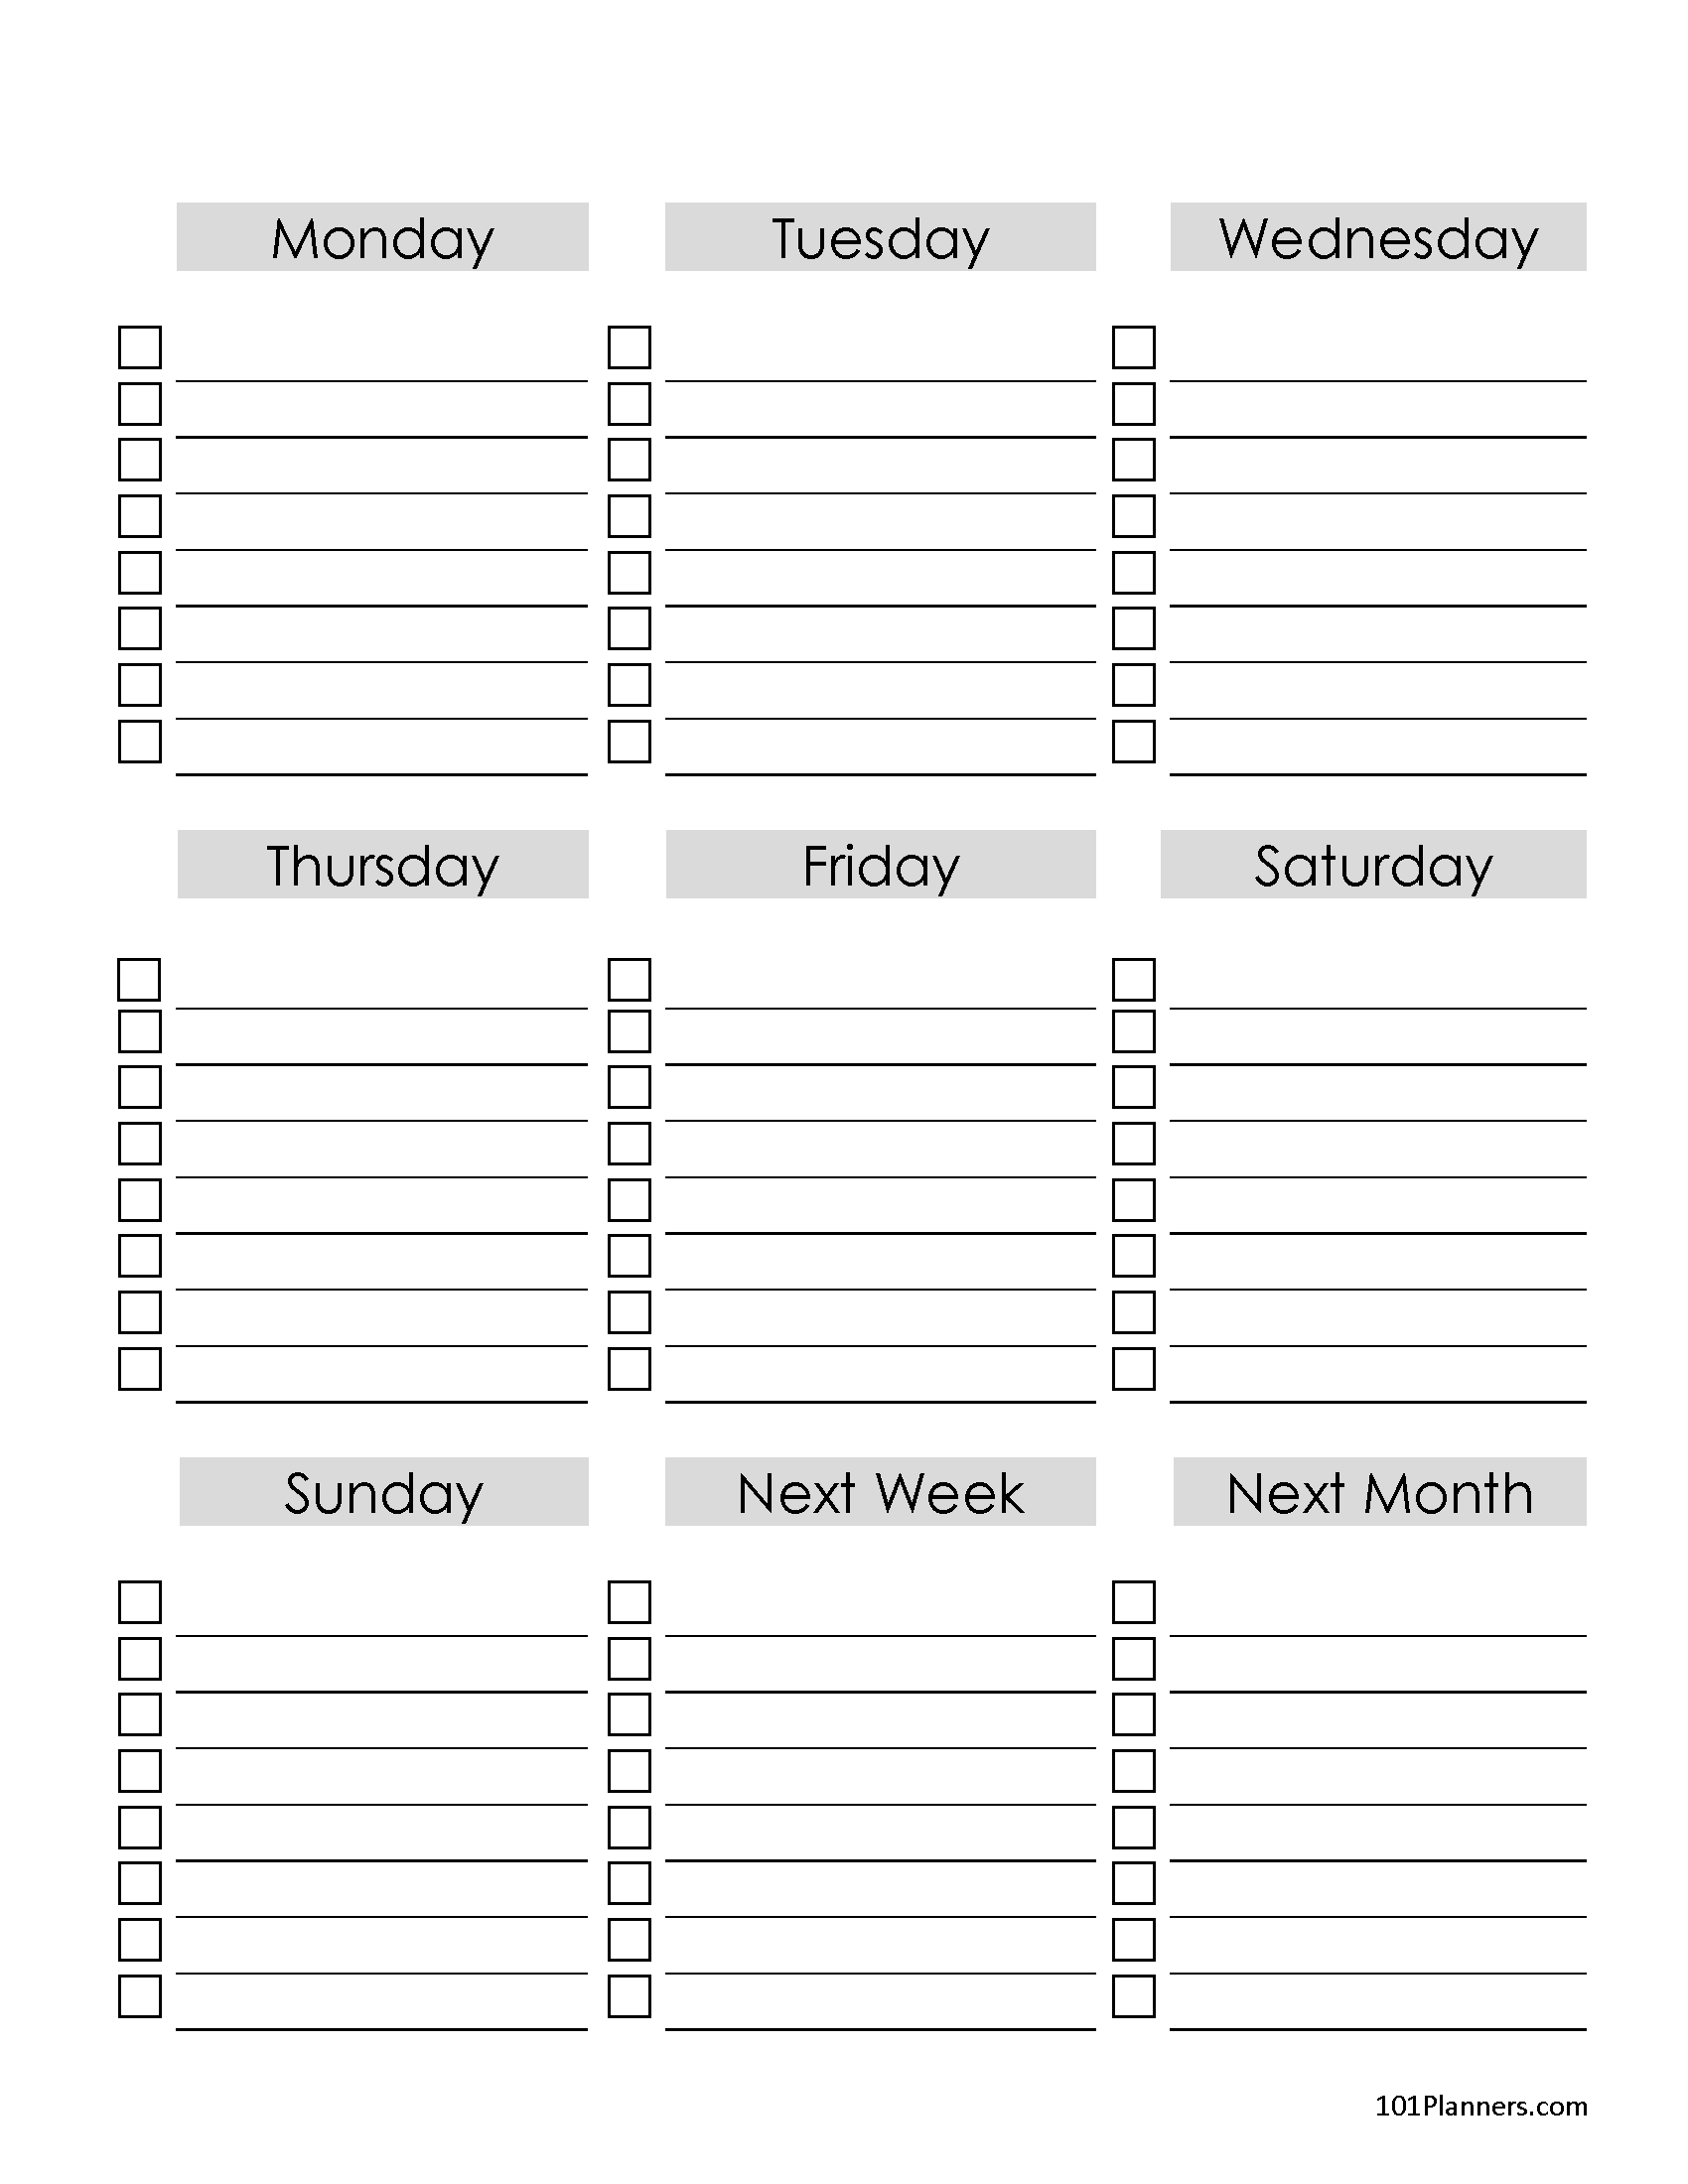 FREE Checklist Template Word Within Blank Checklist Template Word